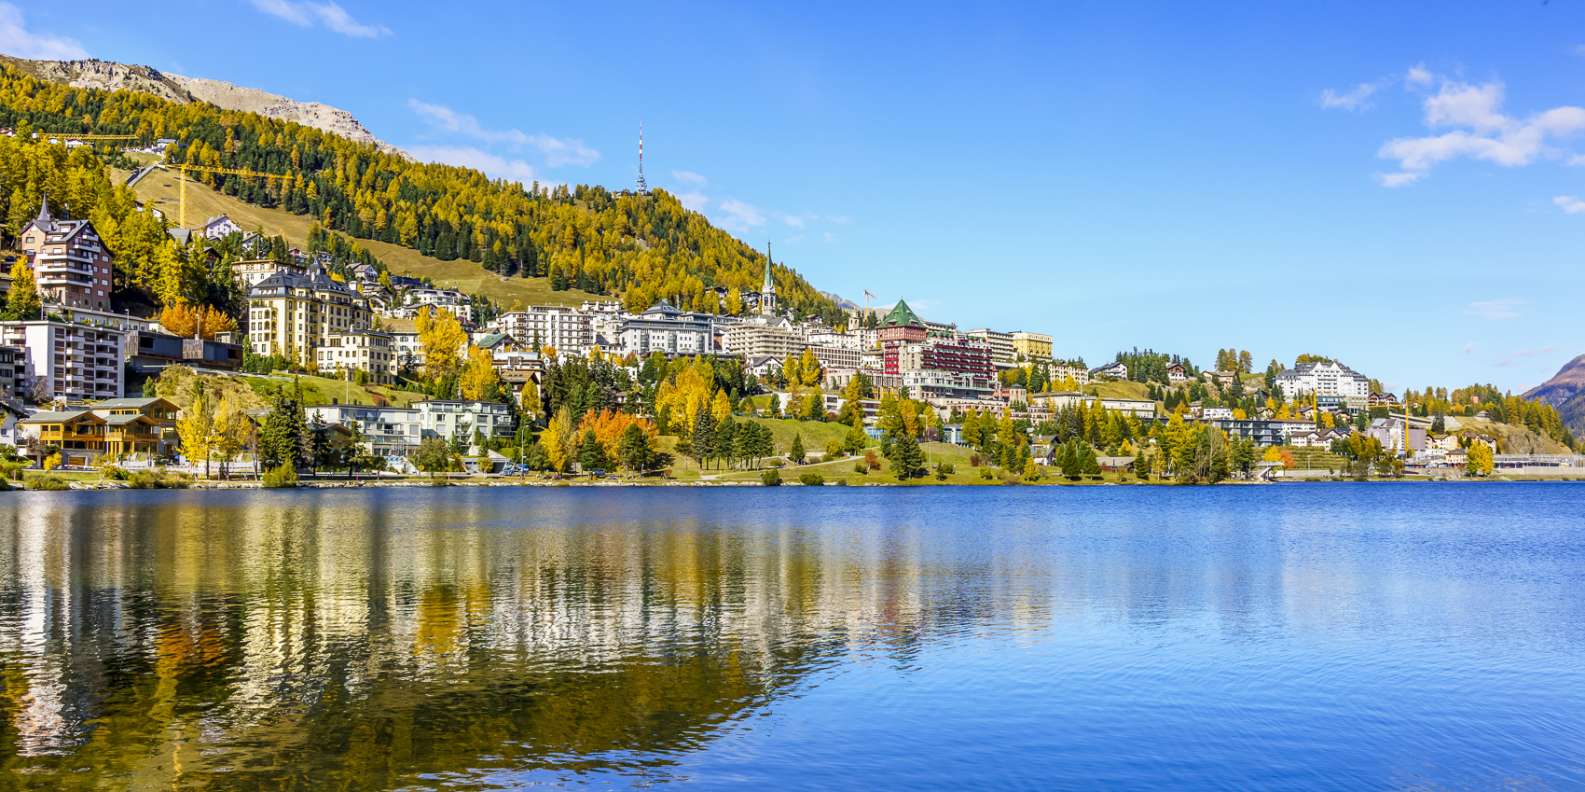 13-intriguing-facts-about-st-moritz-lake